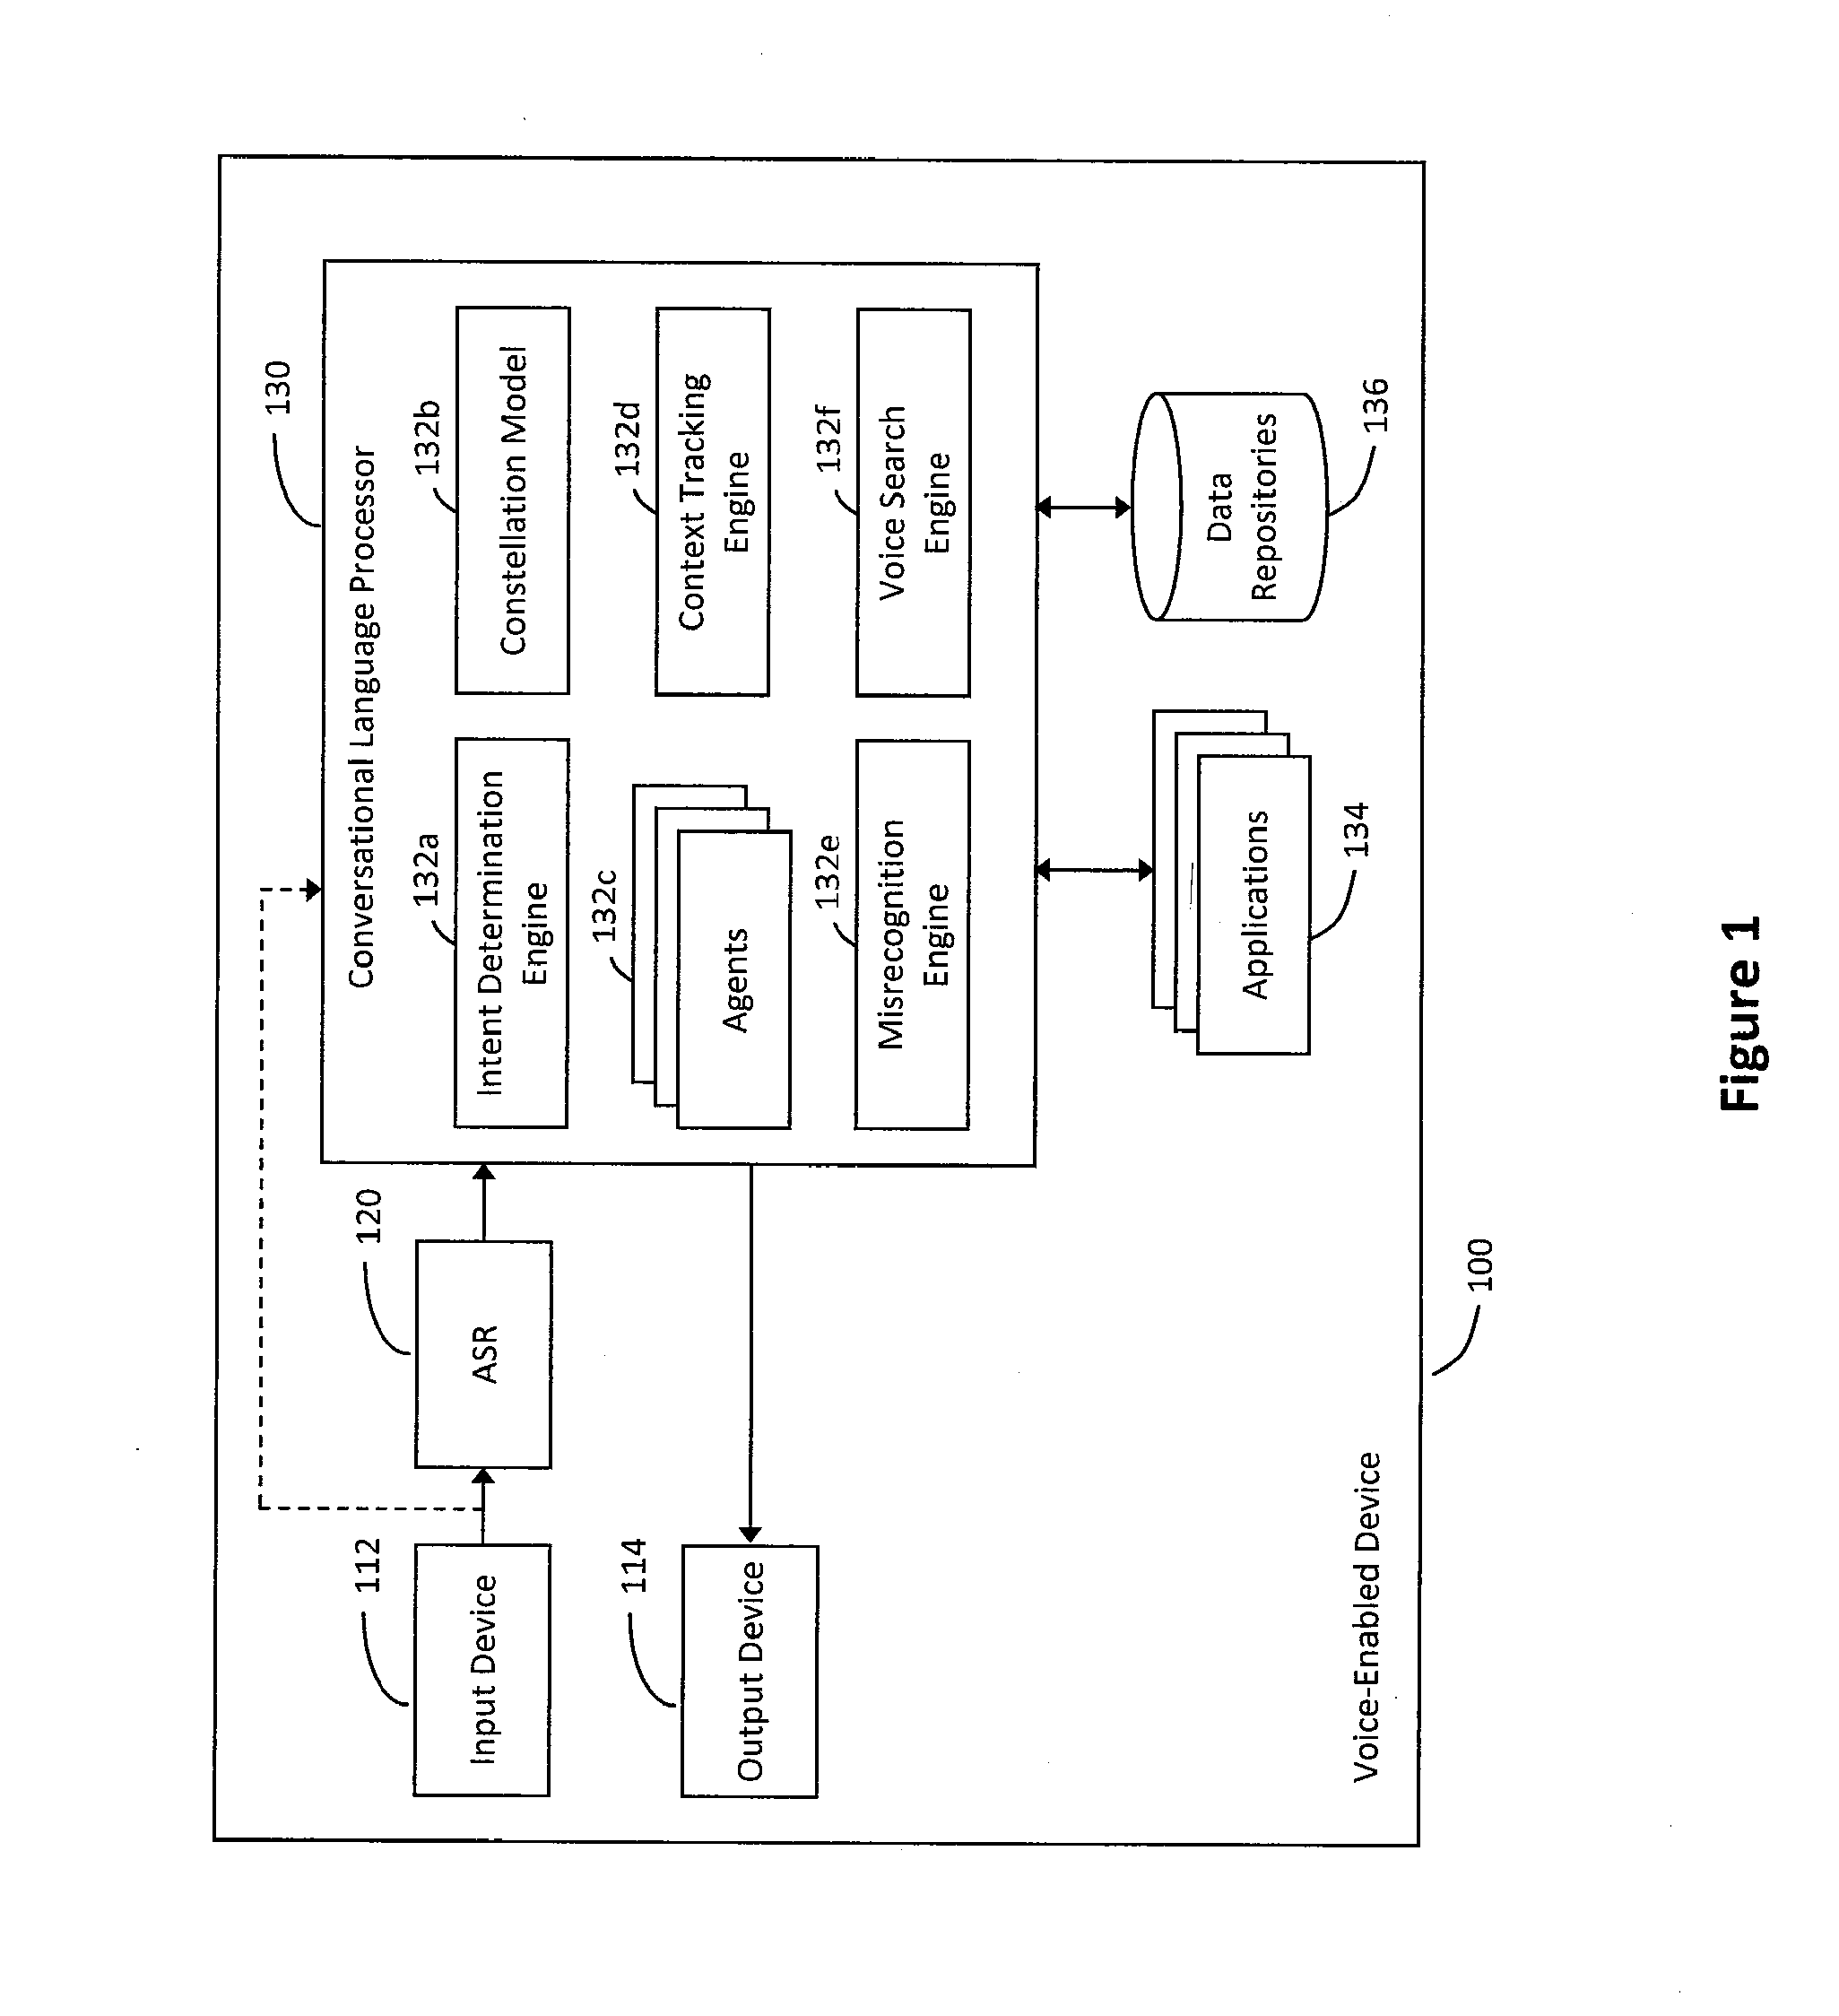 System and method for providing a natural language content dedication service